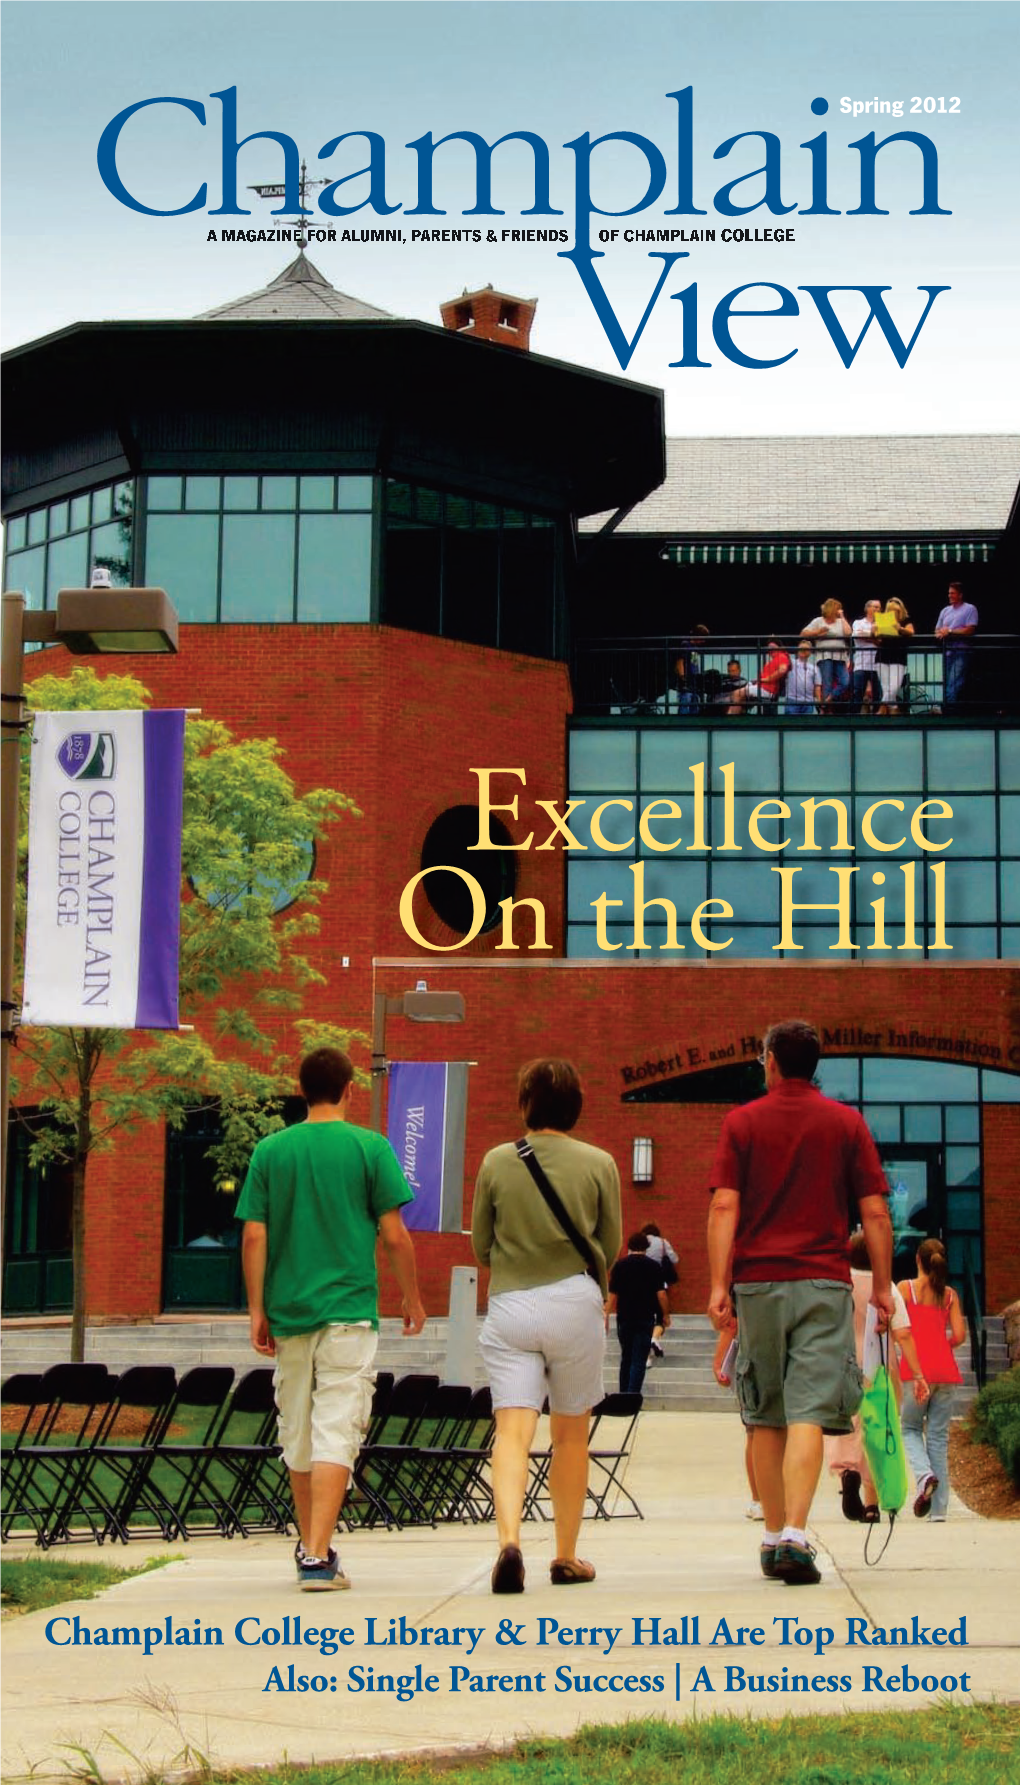 Excellence on the Hill